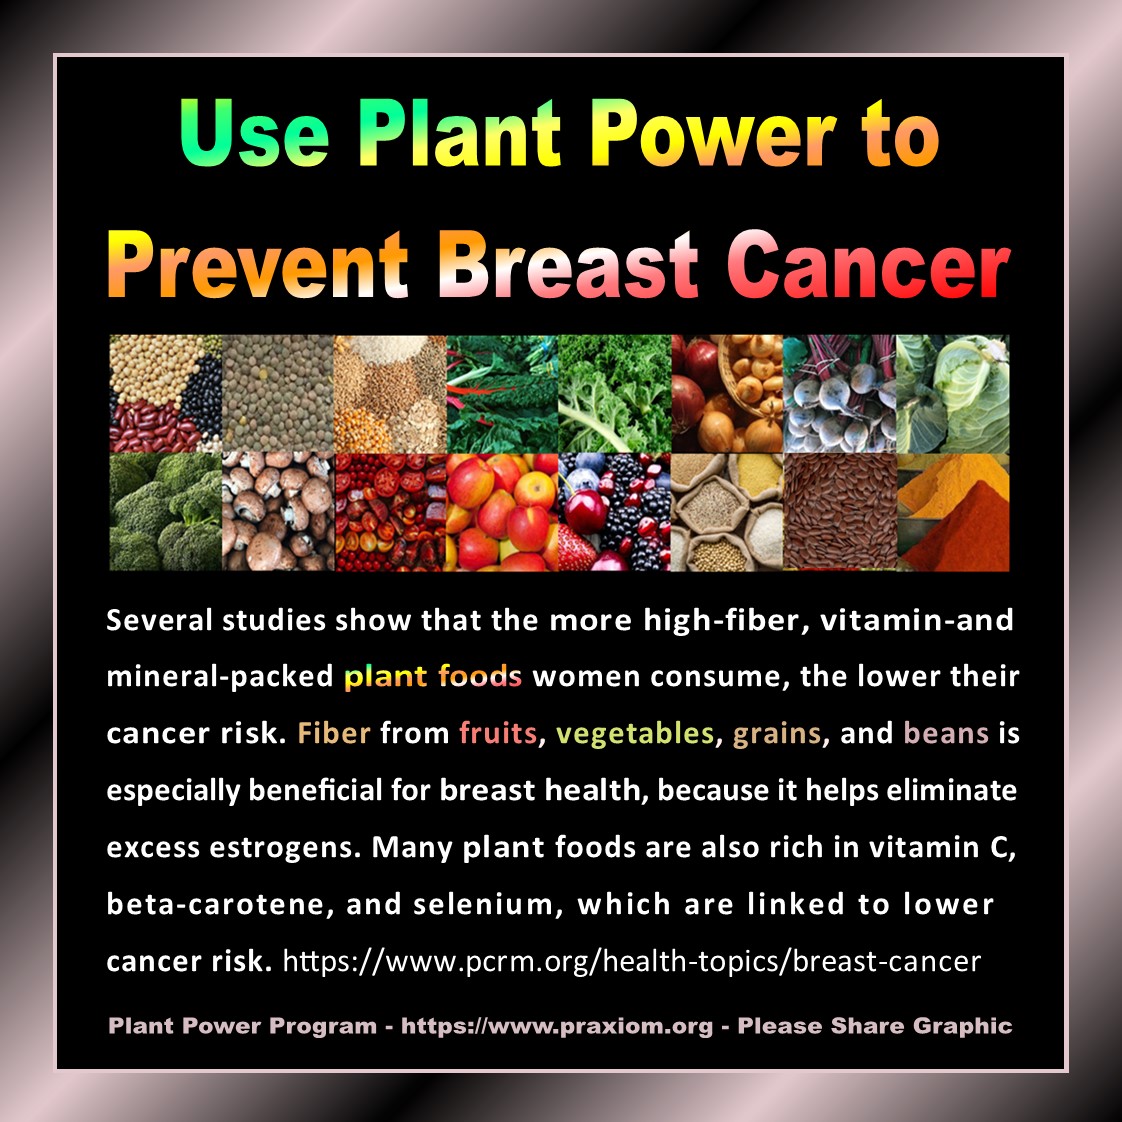 Use Plants to Prevent Breast Cancer